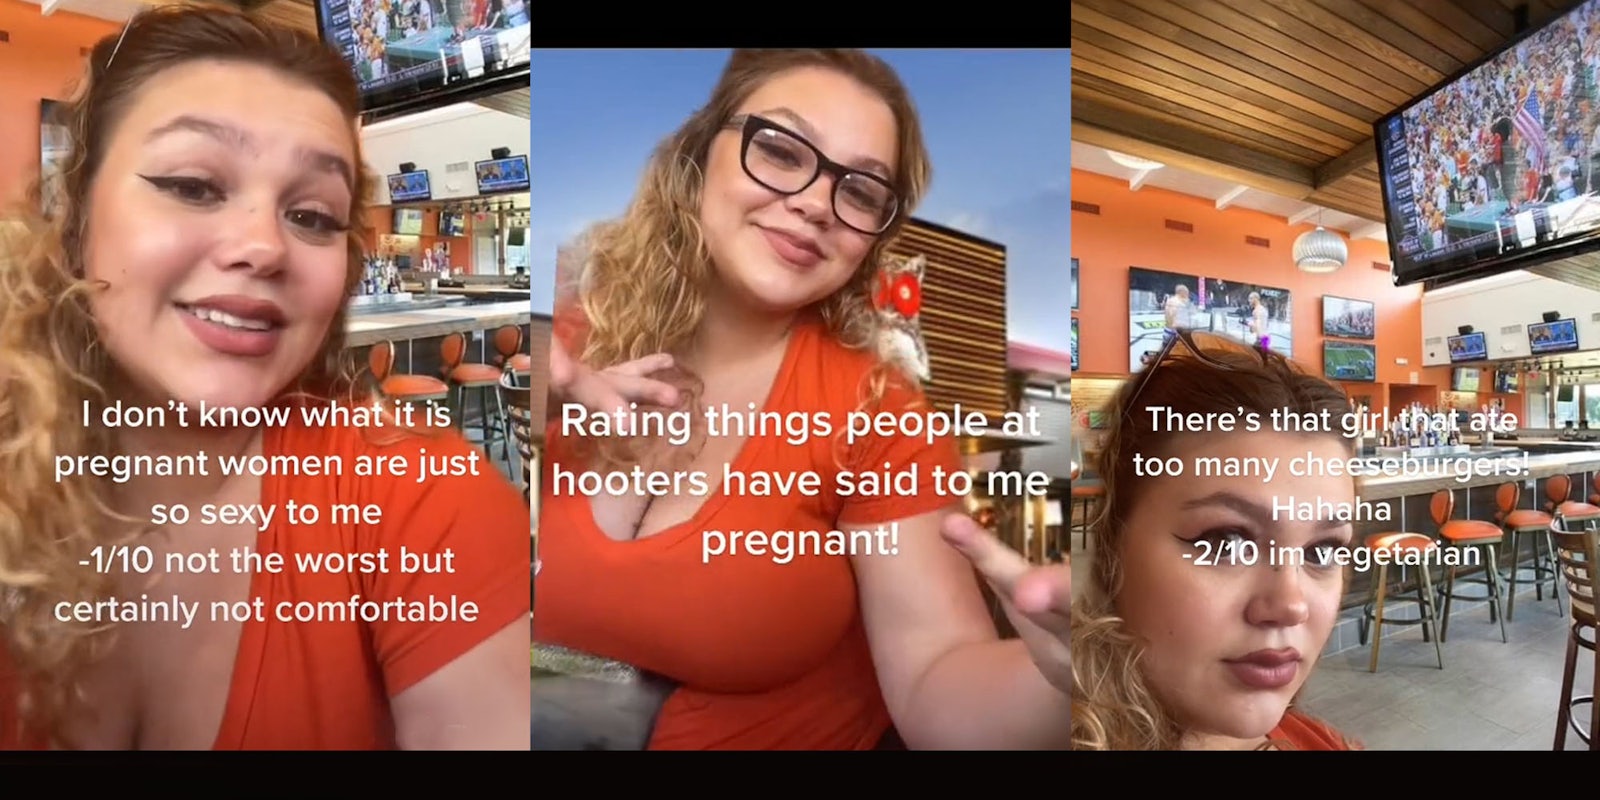 Hooters employee greenscreen TikTok over Hooters interior caption 'I don't know what it is pregnant women are just so sexy to me -1/10 not the worst but certainly not comfortable' (l) Hooters employee greenscreen TikTok over hooters restaurant caption 'Rating things people at hooters have said to me pregnant!' (c) Hooters employee greenscreen TikTok over Hooters interior caption 'There's that girl that ate too many cheeseburgers! Hahaha -2/10 im vegetarian' (r)